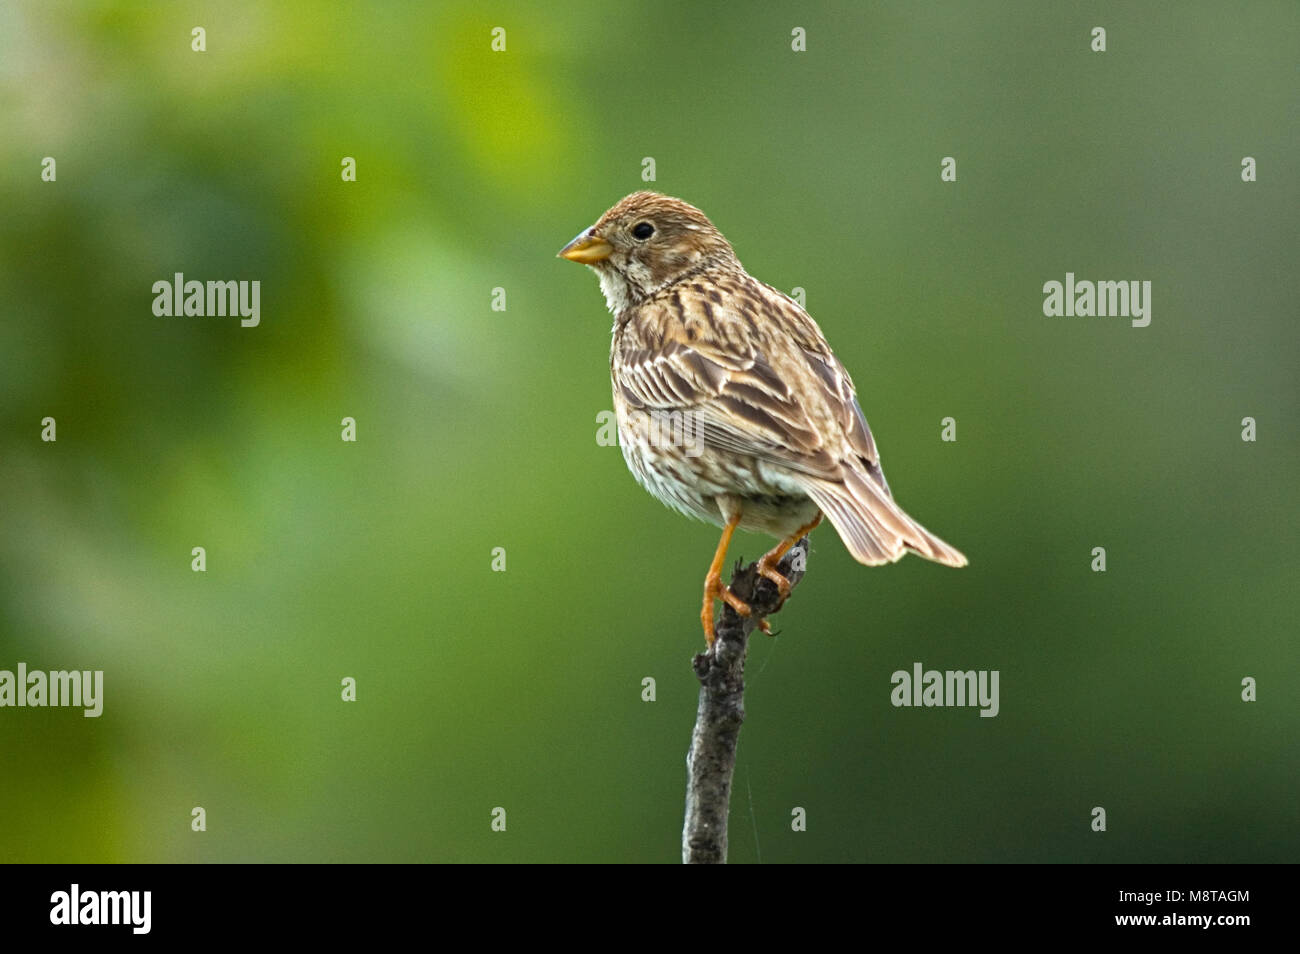 Corn Bunting perched; Grauwe Gors zittend Stock Photo